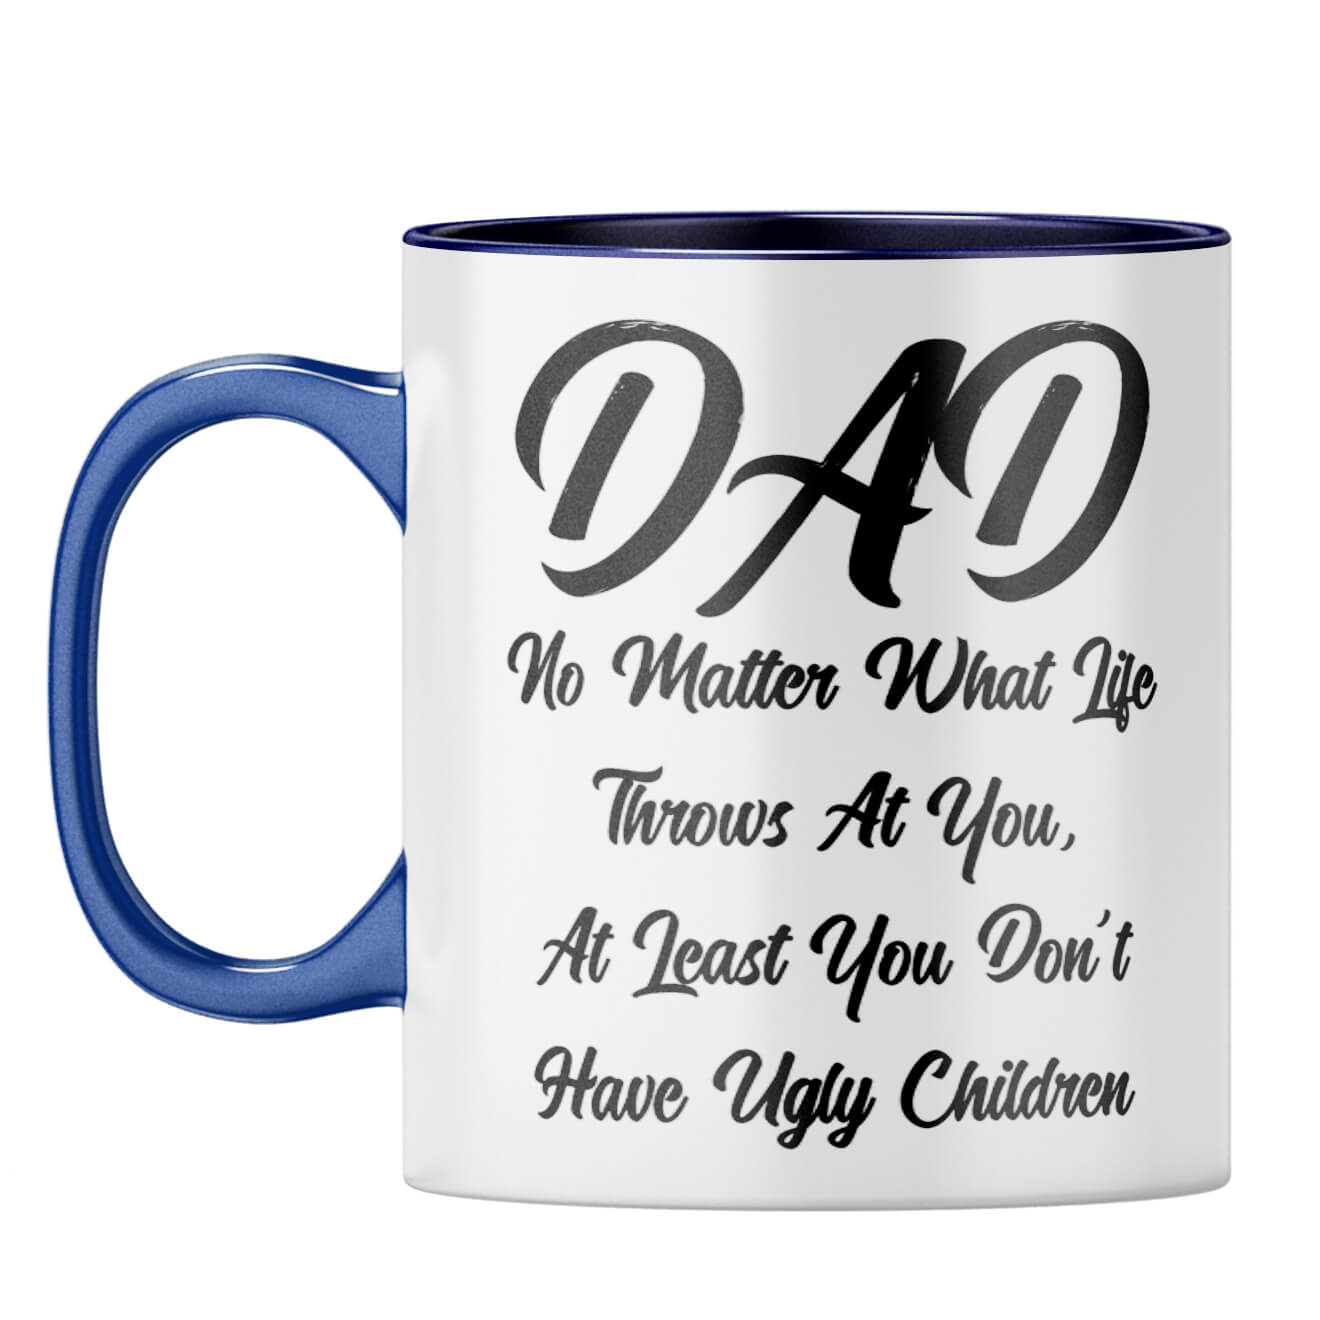 Dad Doesn't Have Ugly Children Coffee Mug